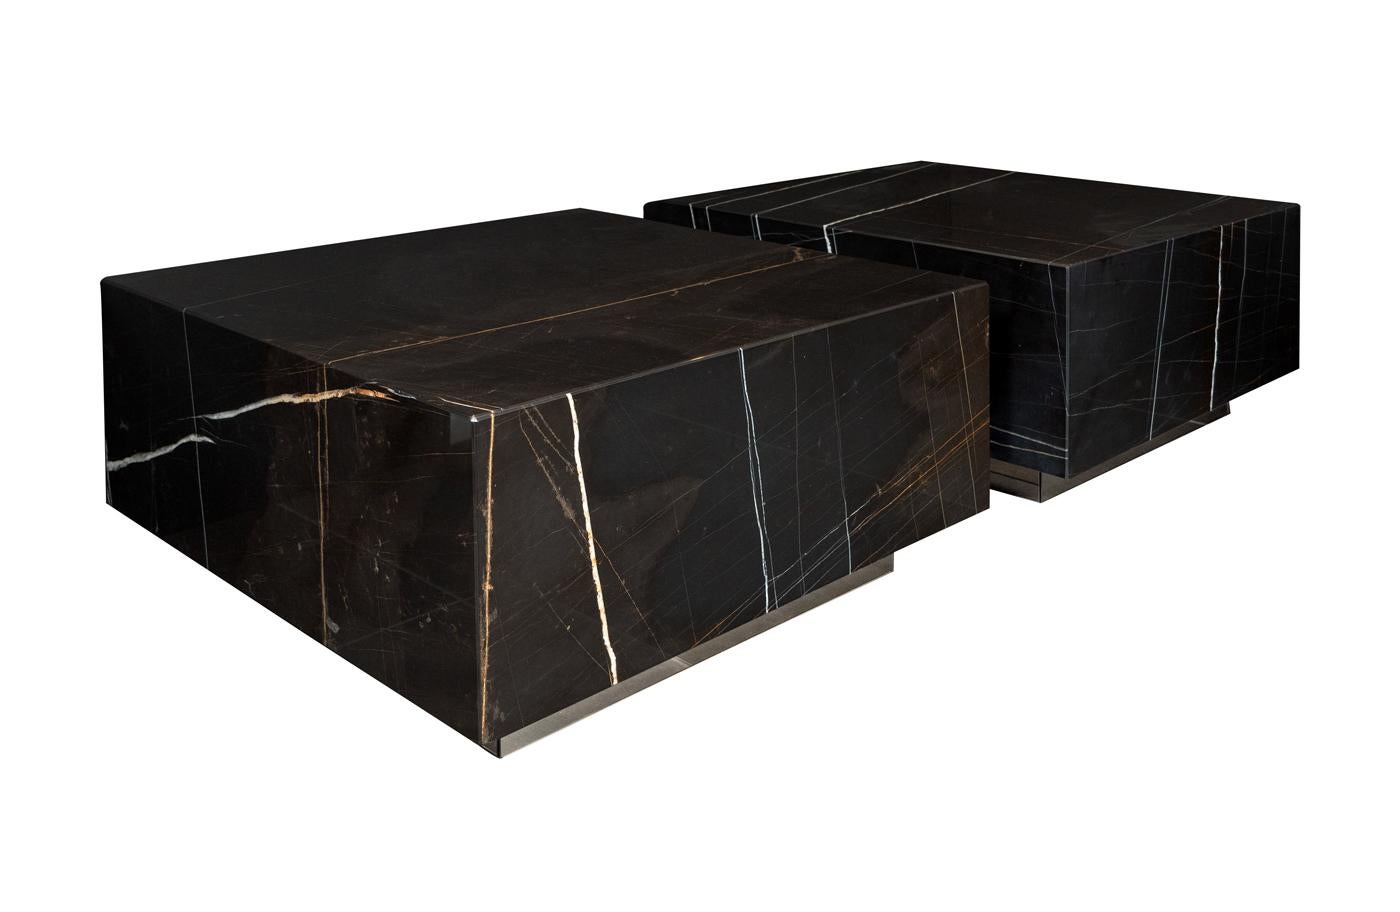 Black marble Cocktail Tables on bronze mirror bases.